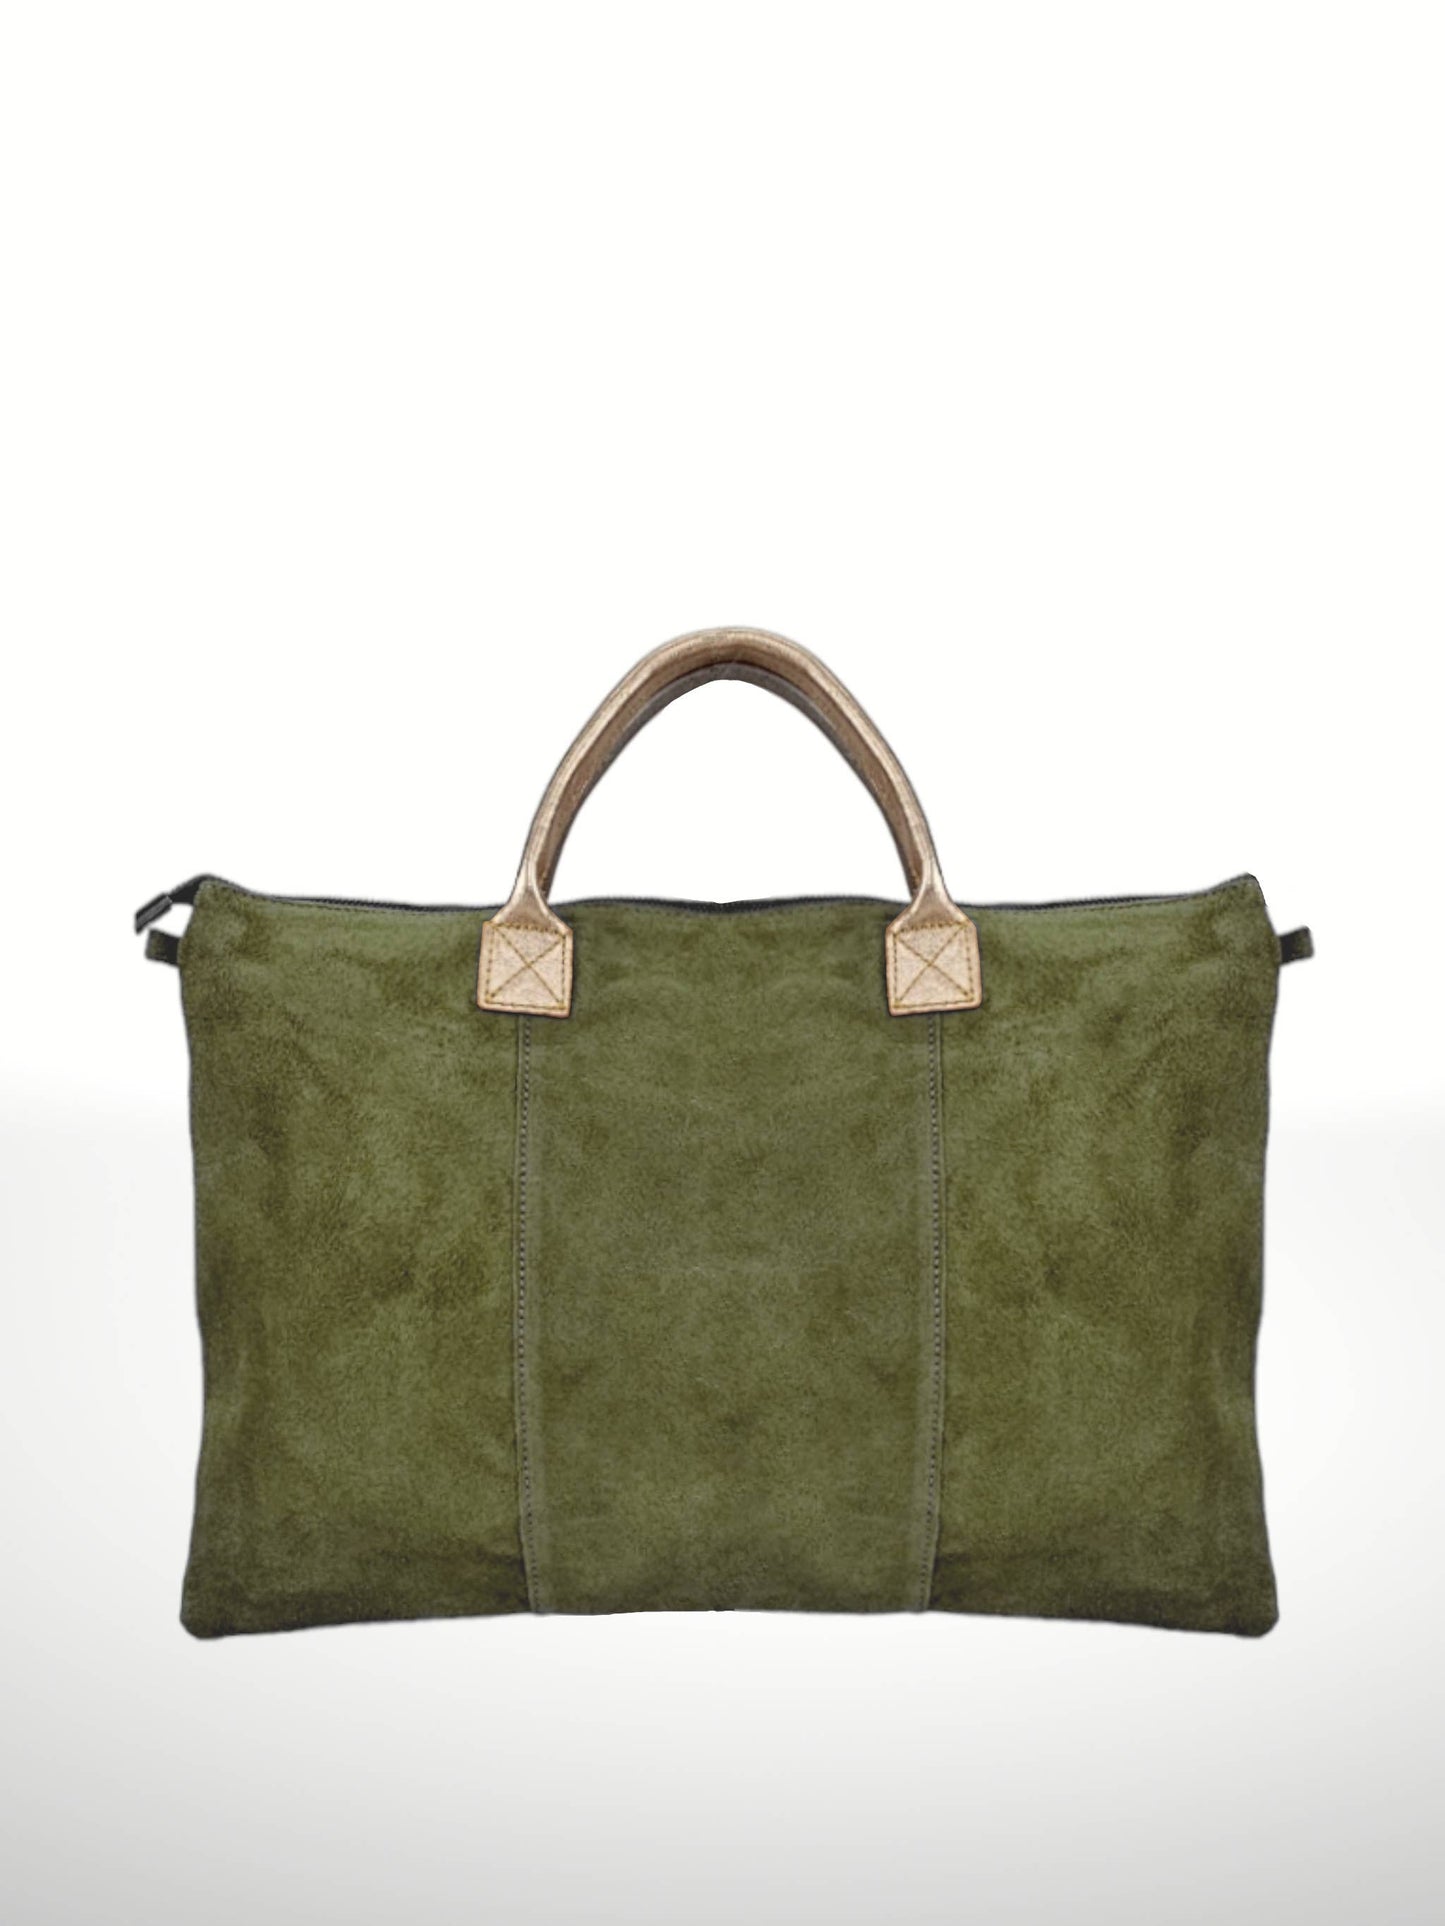 Milano met suede leather bags/: Olive